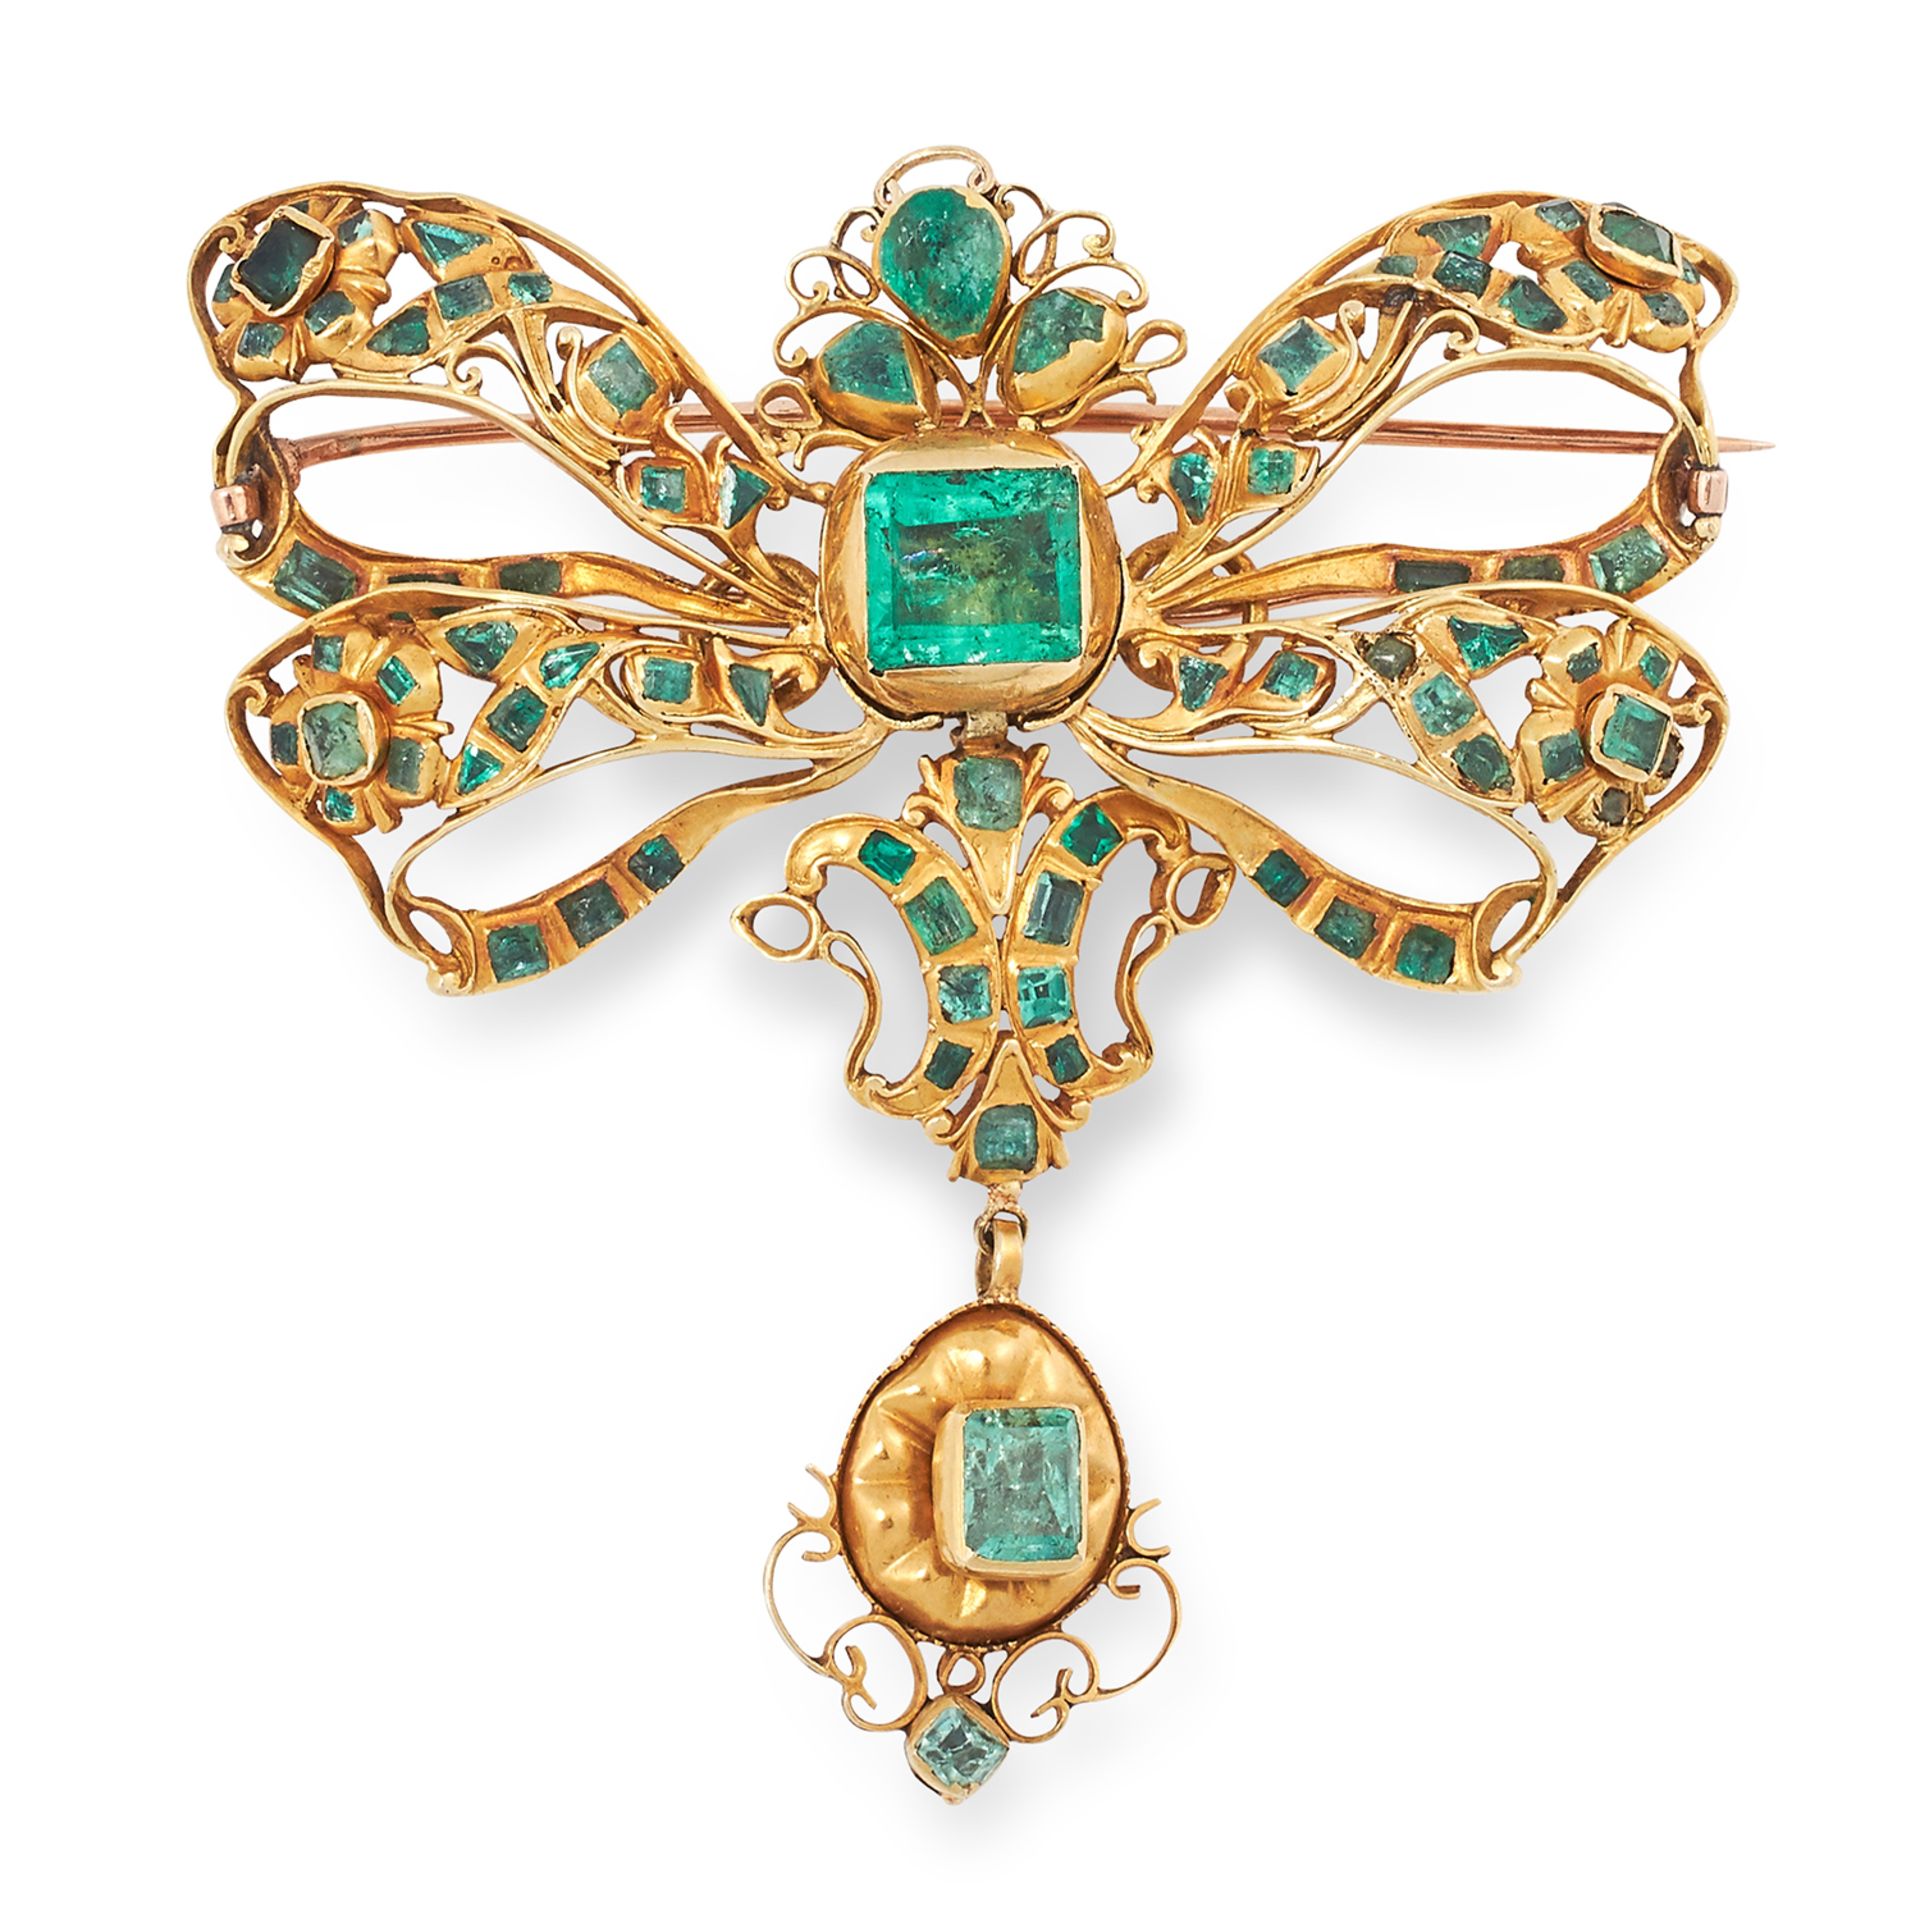 ANTIQUE SPANISH EMERALD BOW BROOCH, 18TH CENTURY set with emerald cut and pear cut emeralds, 6.